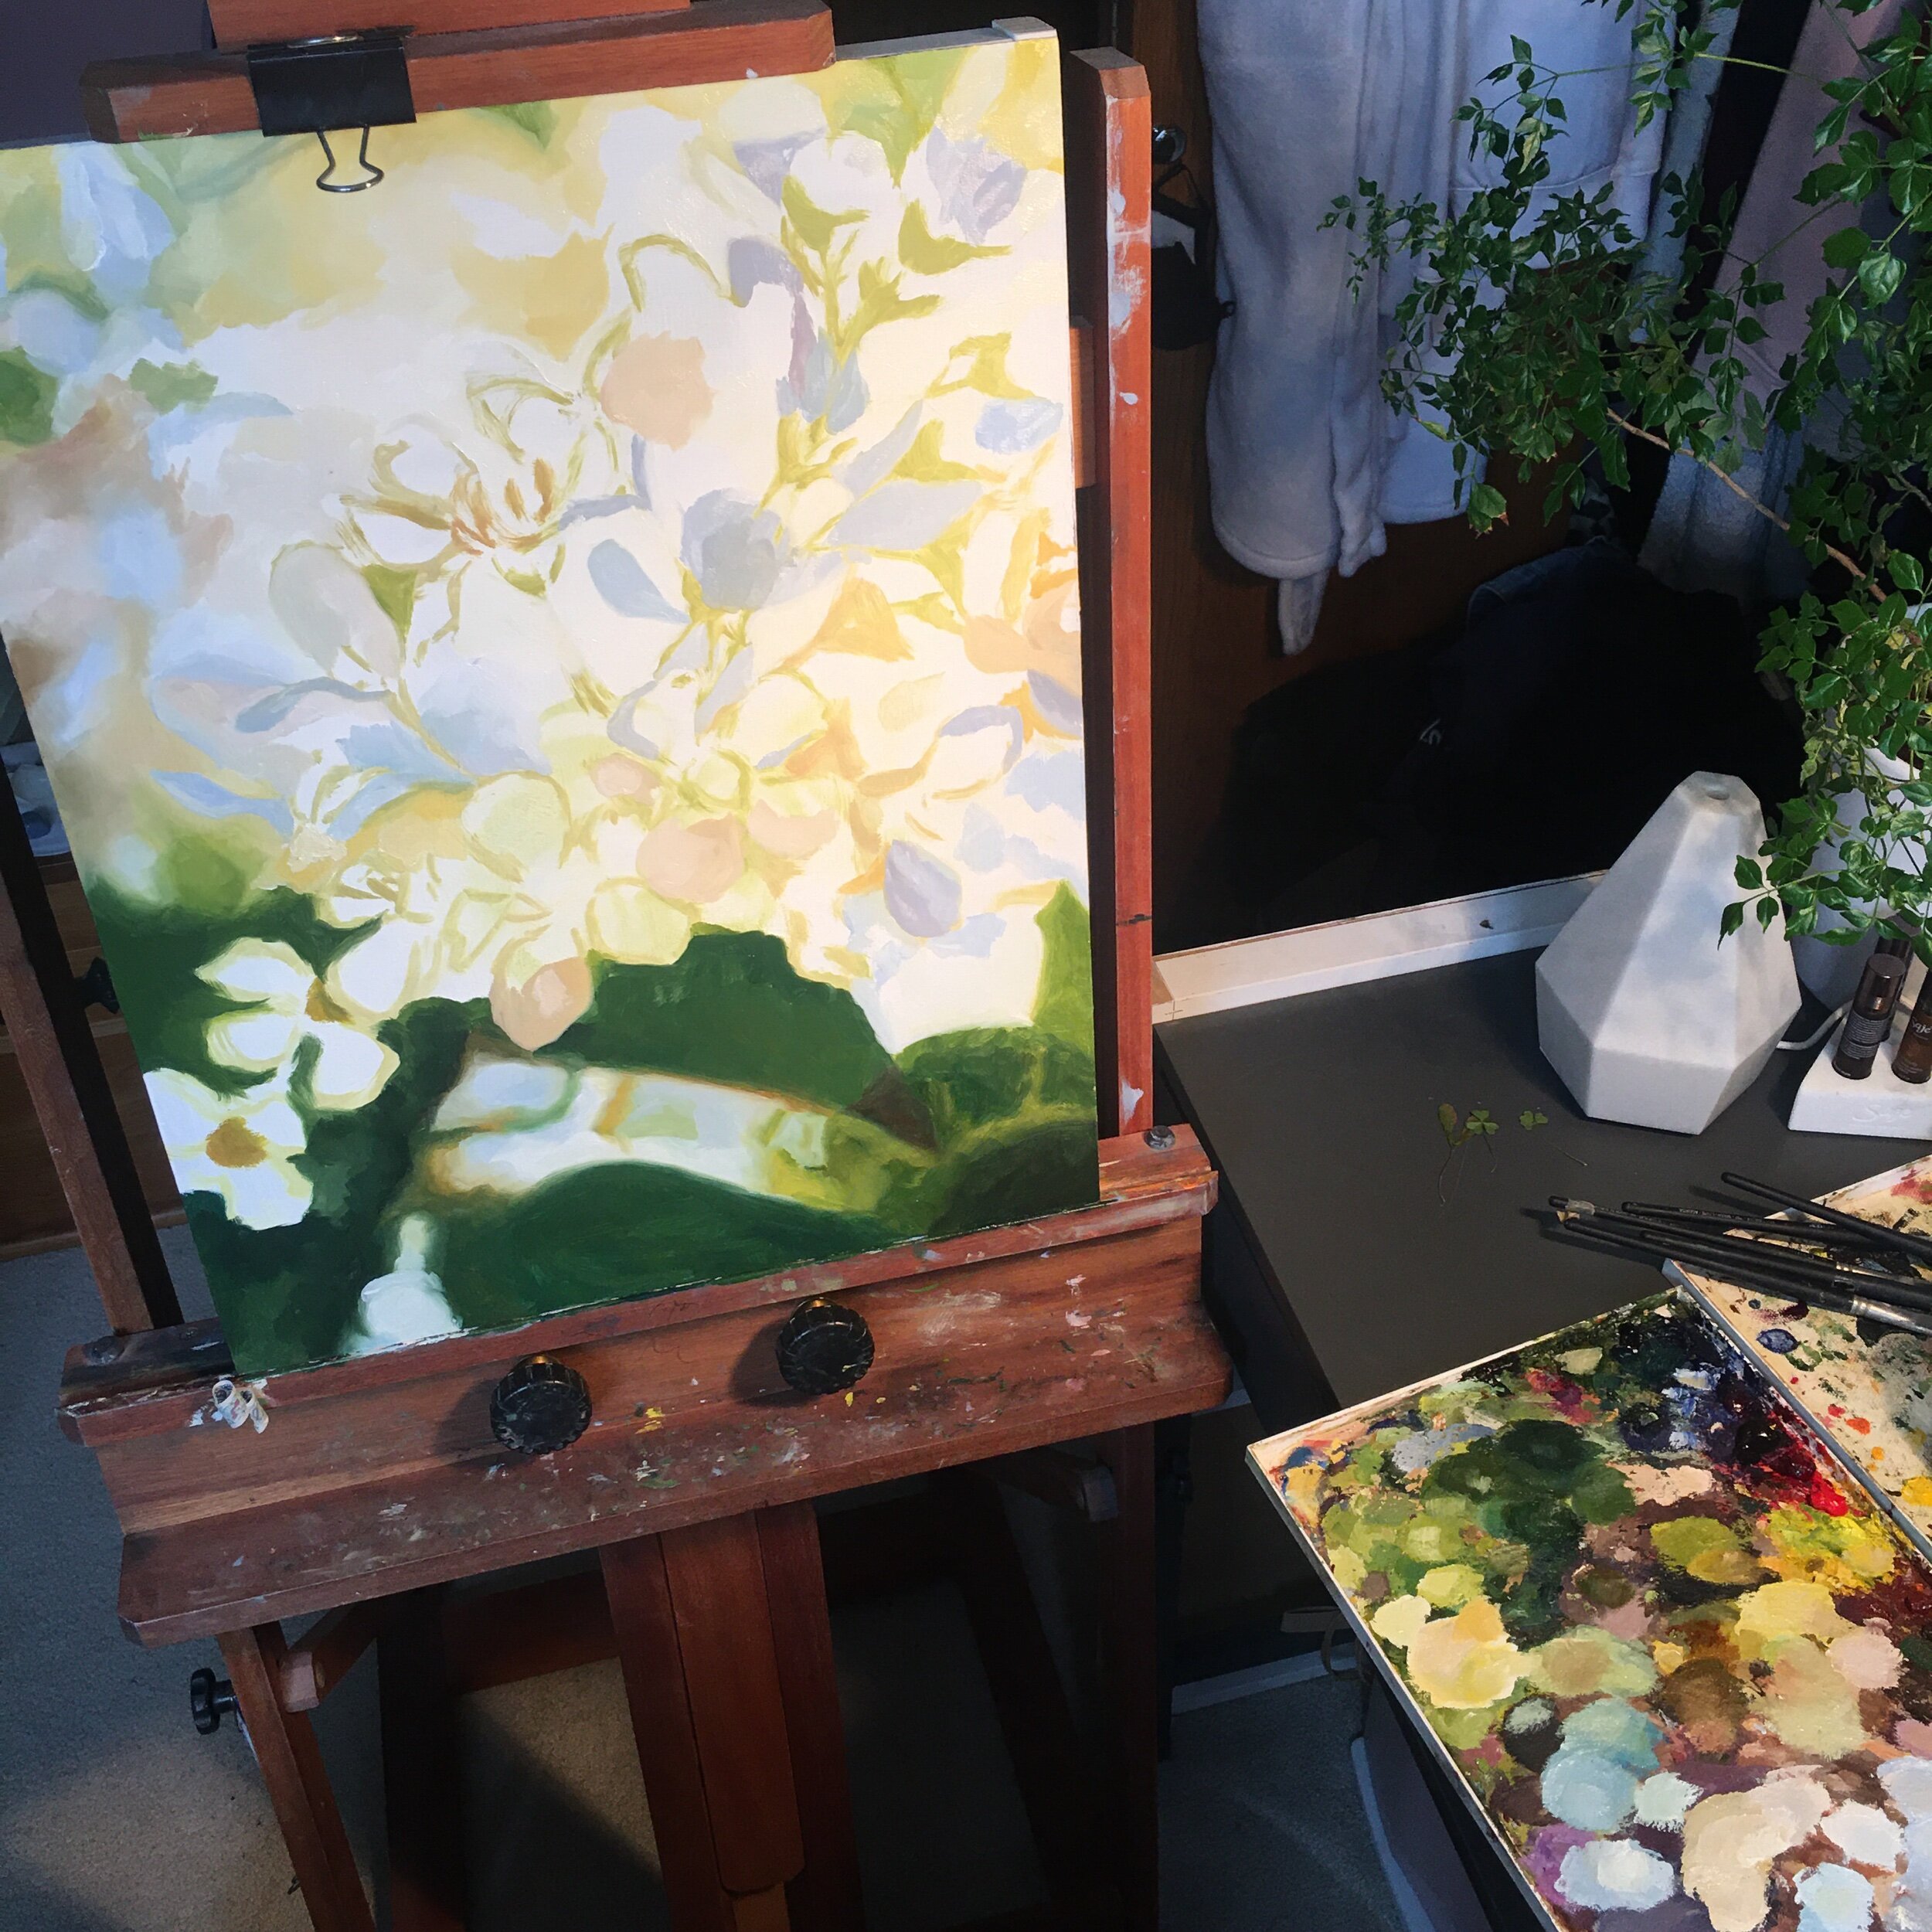 A progress photo from a recent painting, enjoying the process. Image description: An unfinished painting of flowers sits on an easel to the left and a colourful palette of paint sits on the corner of a grey desk on the right.